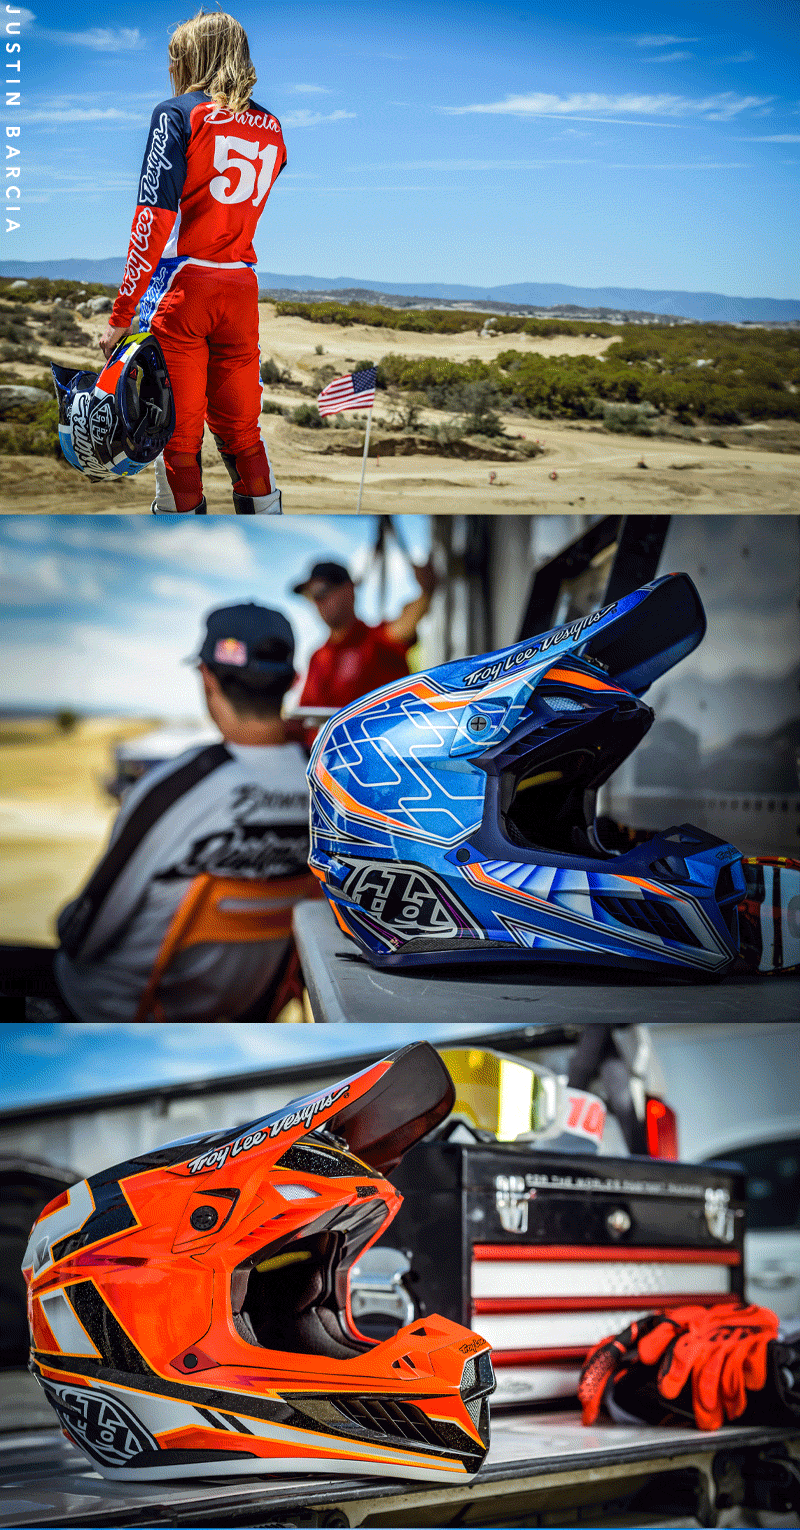 Troy Lee Designs: The all-new SE5's Lookbook